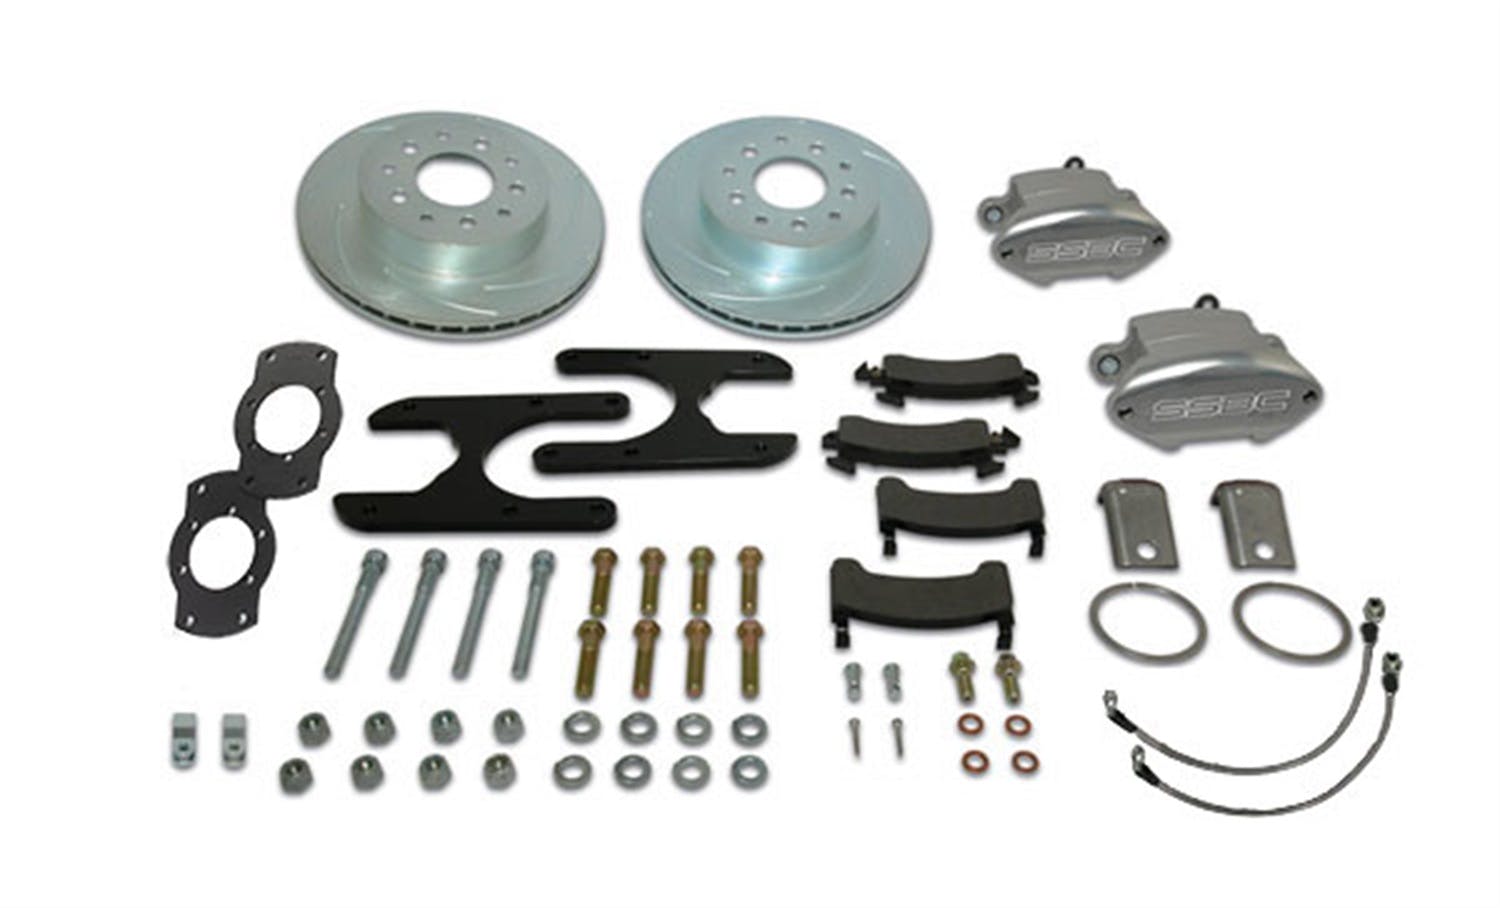 Stainless Steel Brakes A110-11BK Kit A110-11 w/black calipers